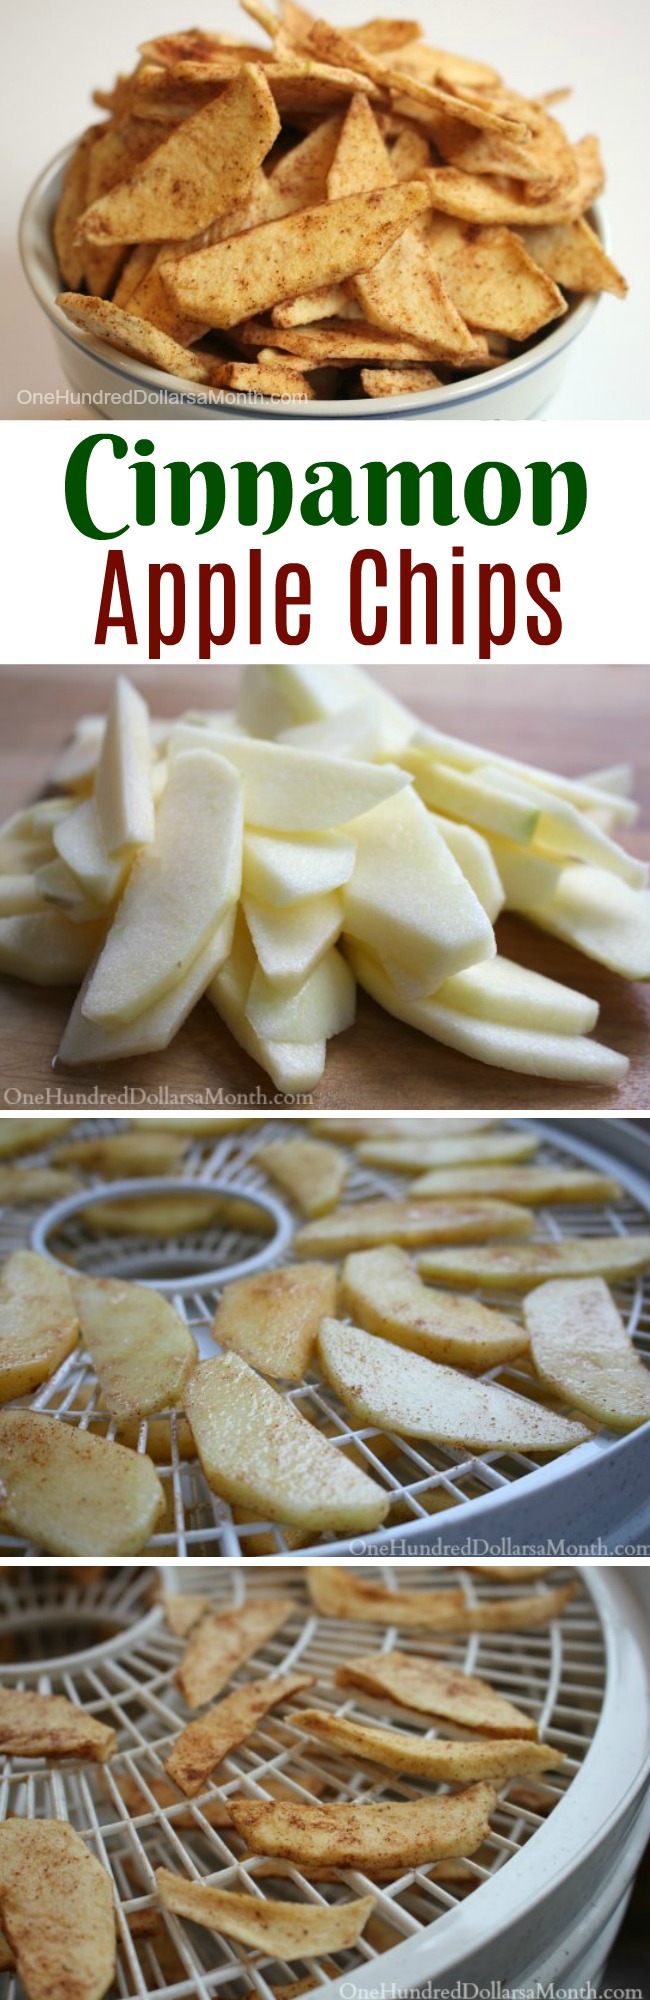 How to Make Cinnamon Apple Chips